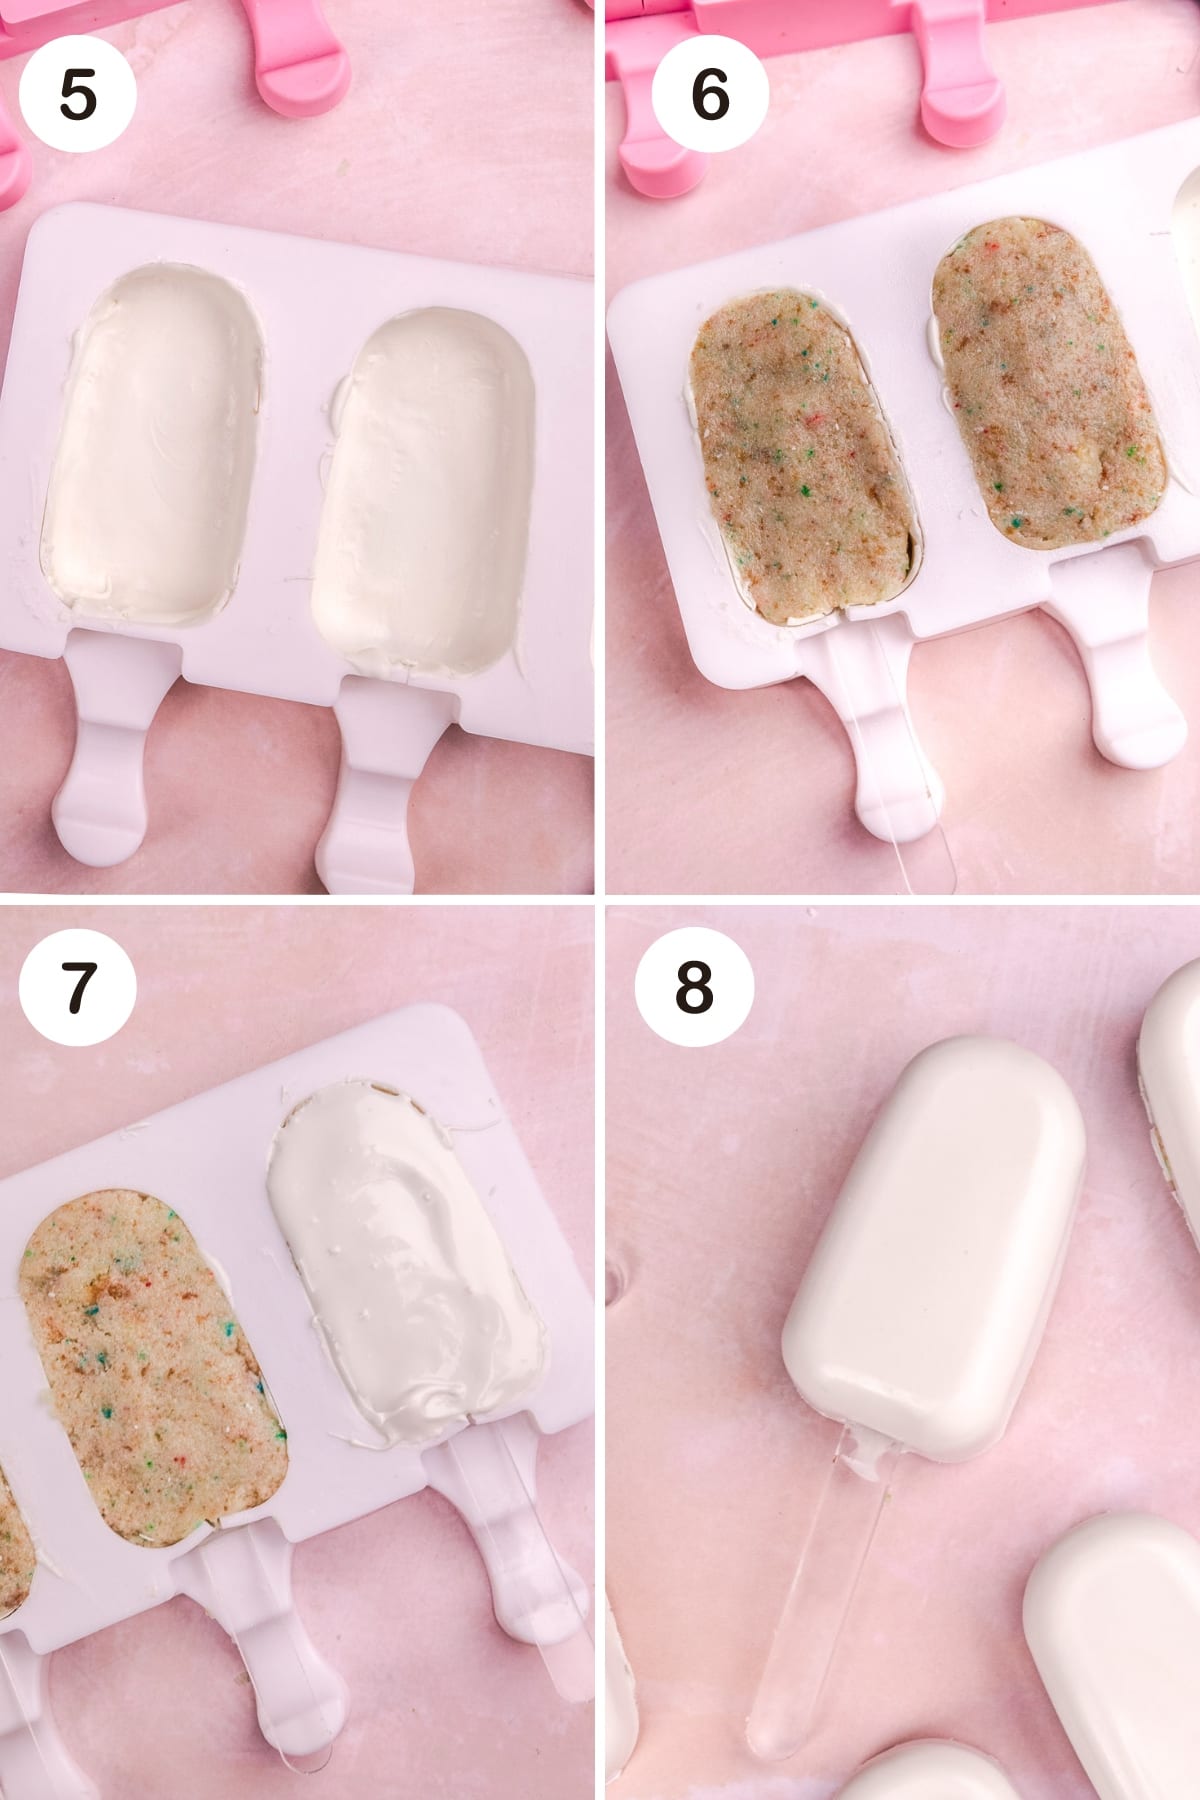 numbered step by step photos showing how to put the cake into silicone molds